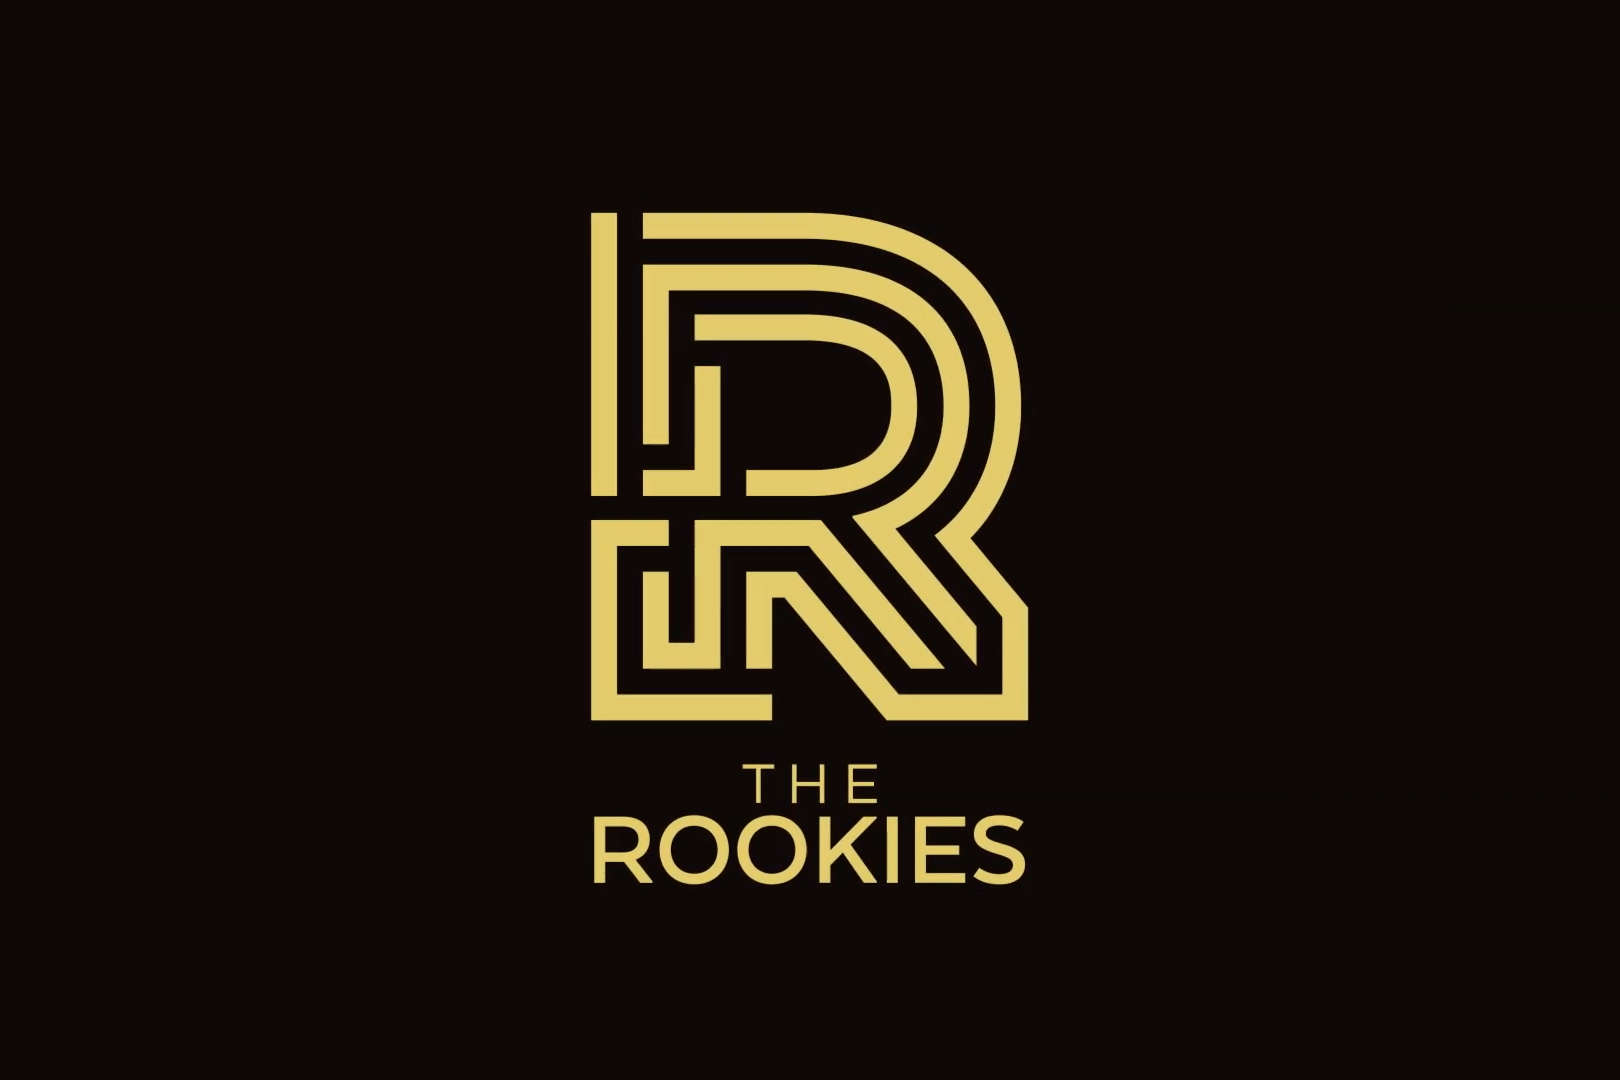 The Rookie Awards